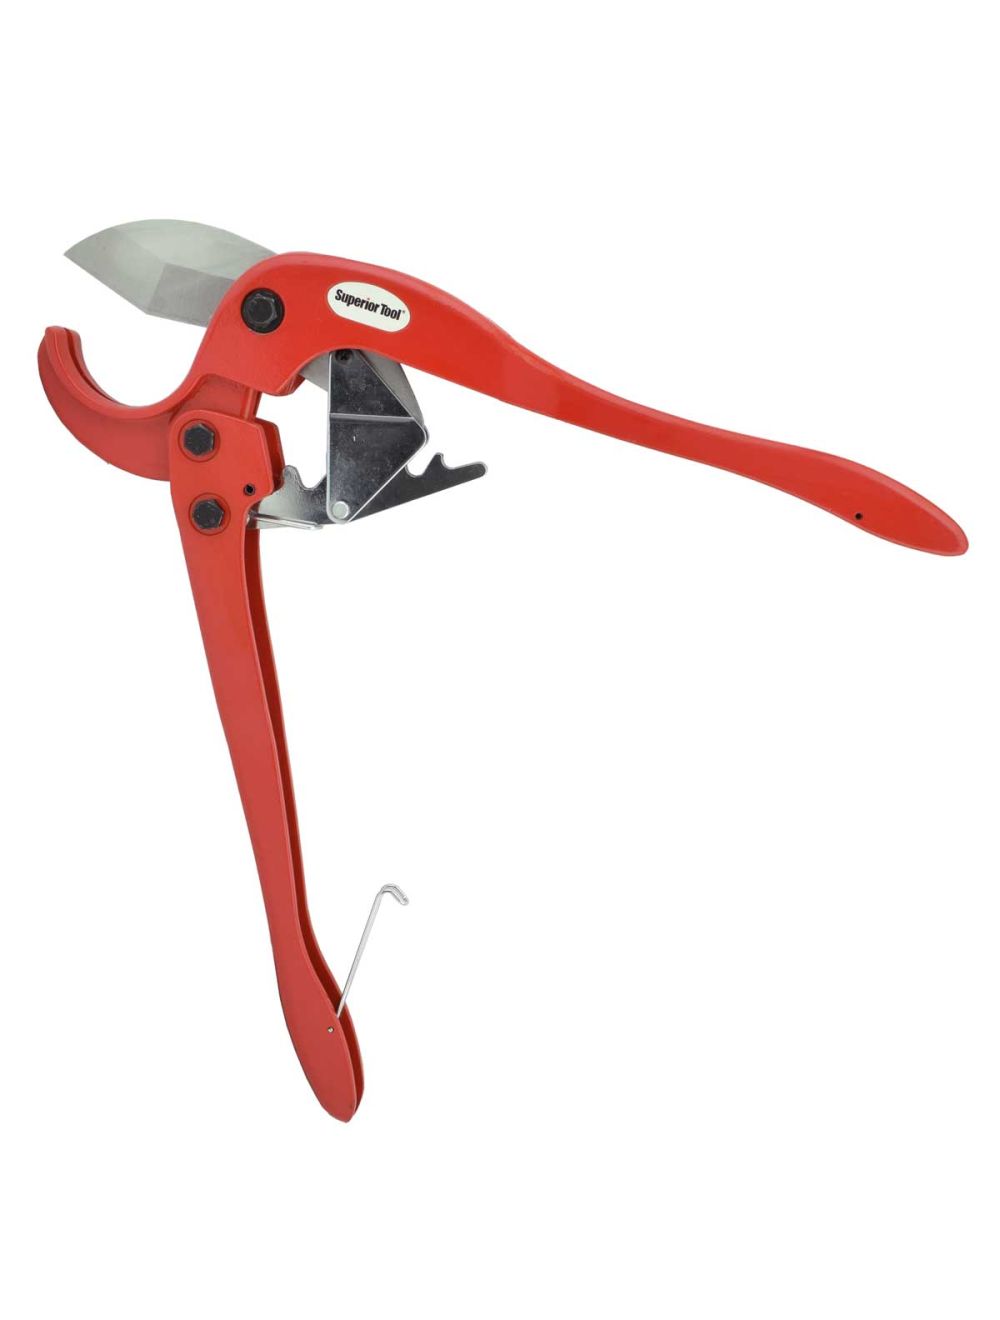 Superior Tool 37115 PVC Pipe Cutter Heavy Duty up to 2 1/2" Inch for sale online 